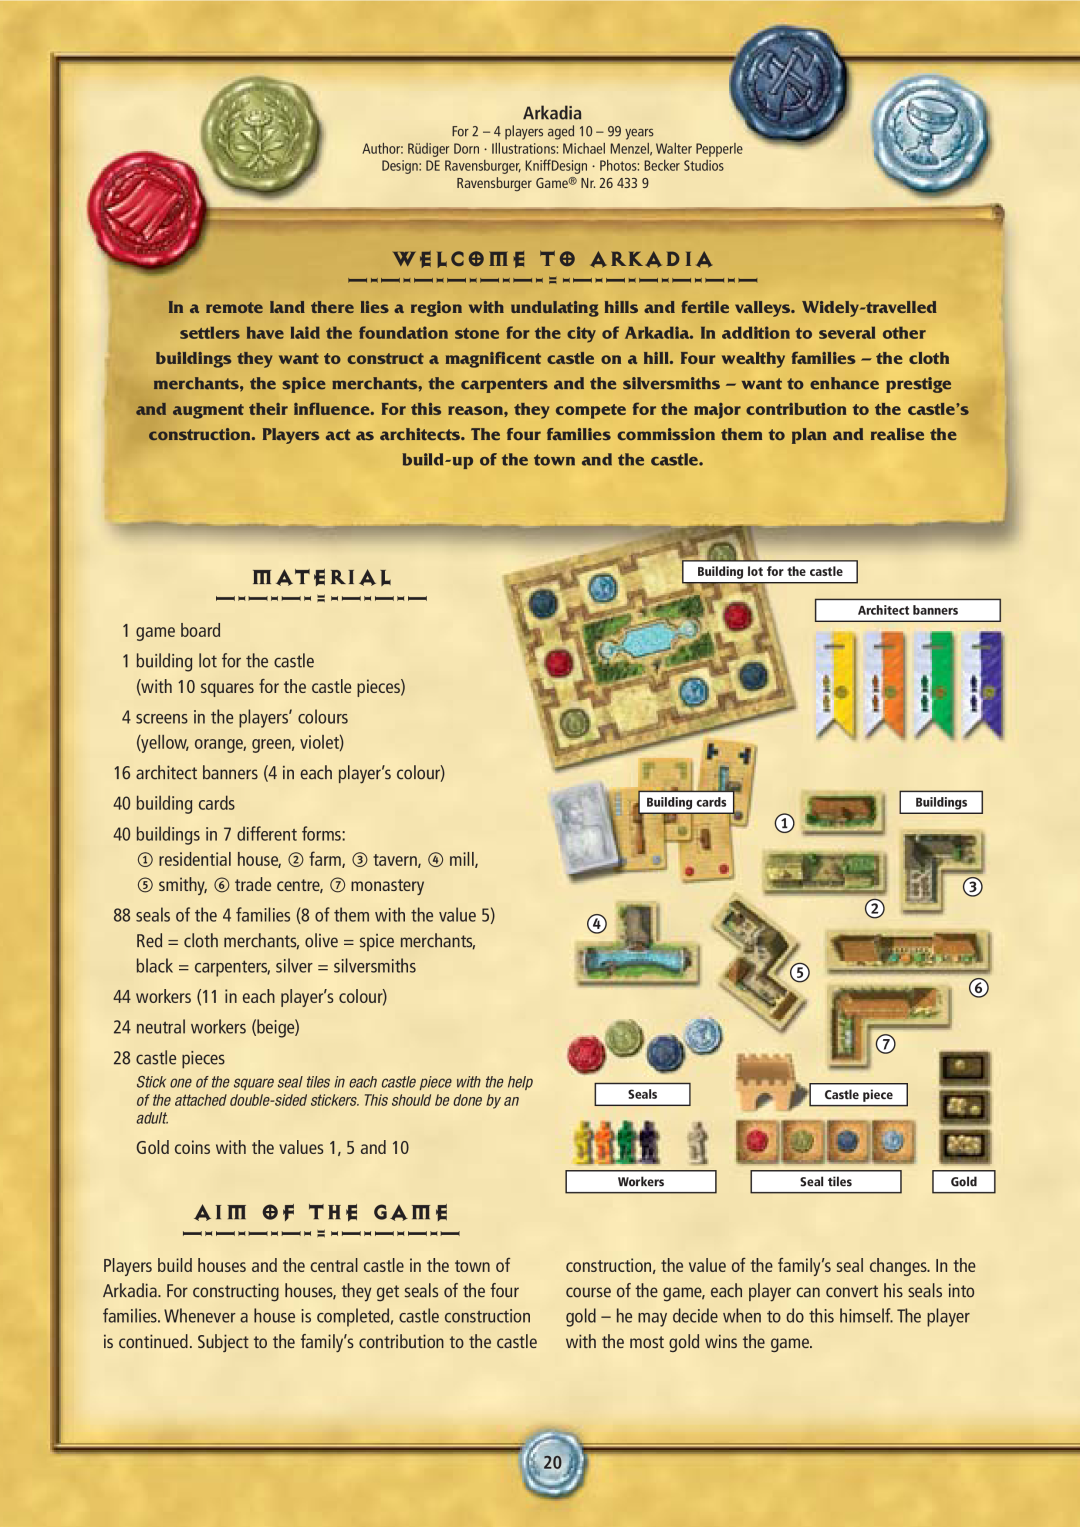 Rio Grande Games 6 manual Welcome To Arkadia =, Material =, Aim Of The Game --------= 